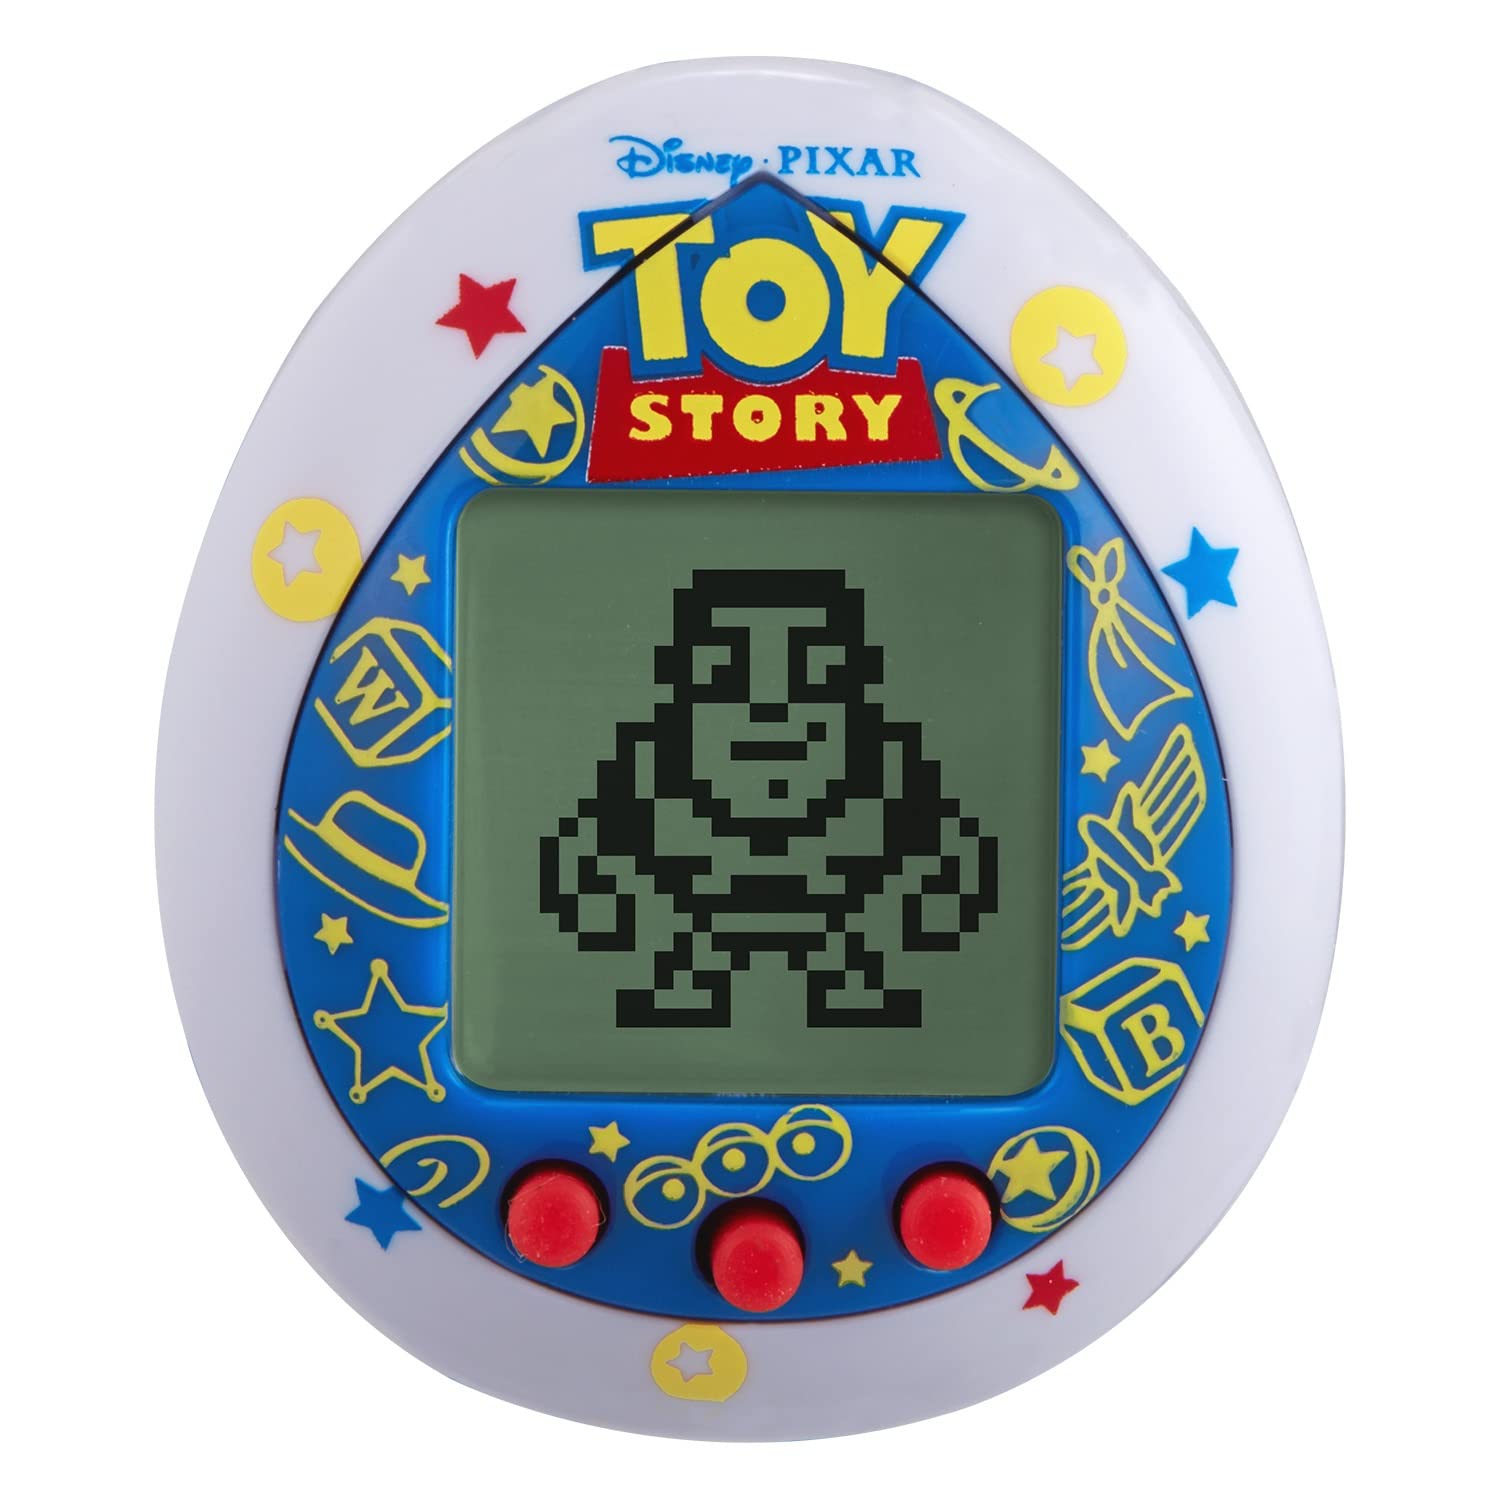 Tamagotchi Nano Toy Story Friends Version | Toy Story Hand Held Games Machine | Virtual Pet Original Toy Story Characters Including Woody and Buzz Lightyear | 90s Toys for Kids and Adults